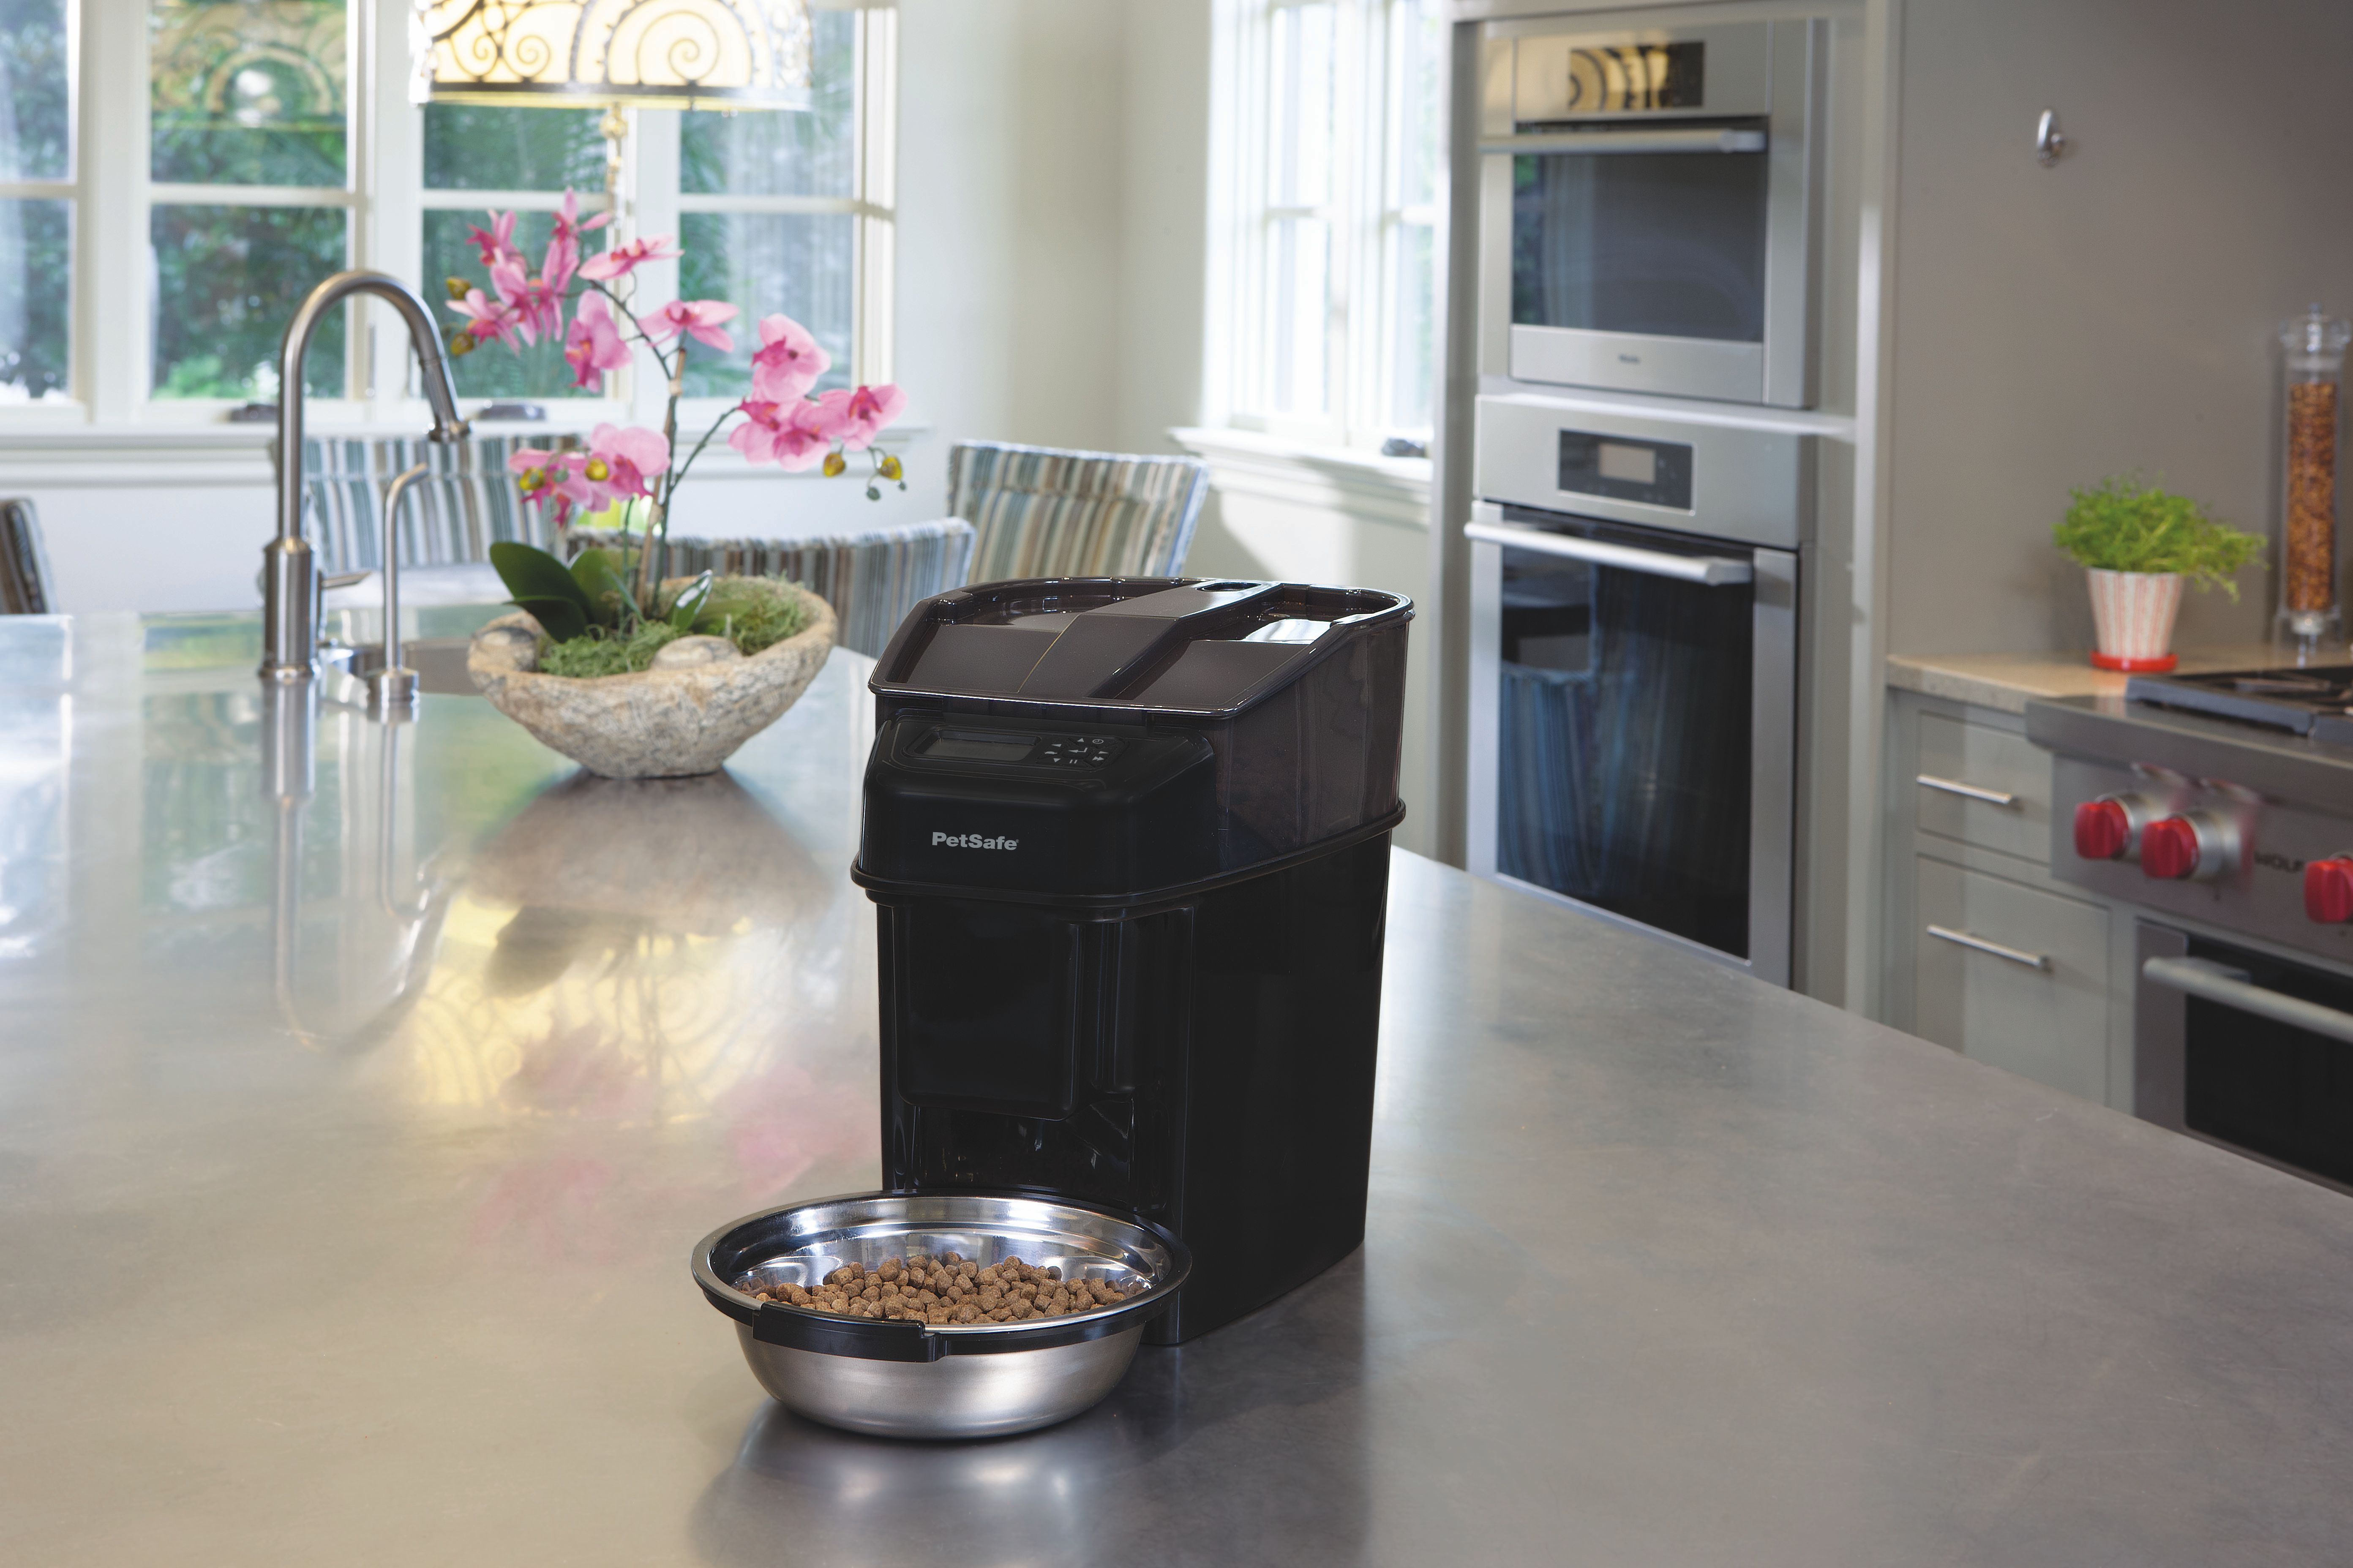 Healthy Pet Simply Feed 12-Meal Auto Feeder